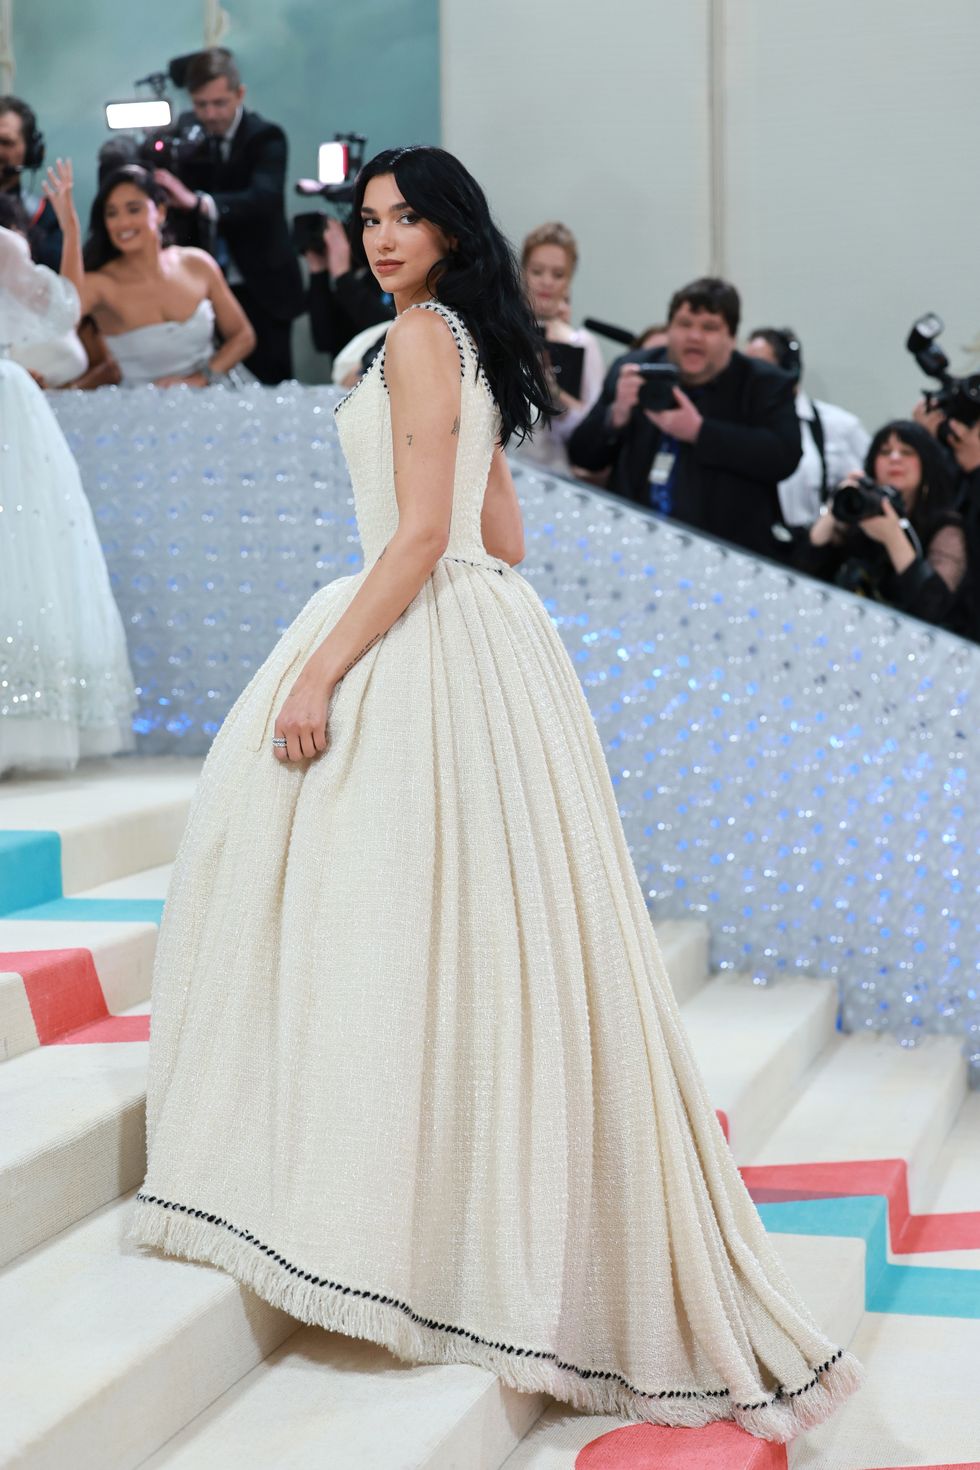 Karl Lagerfeld's Chanel Dresses on the Oscars Red Carpet